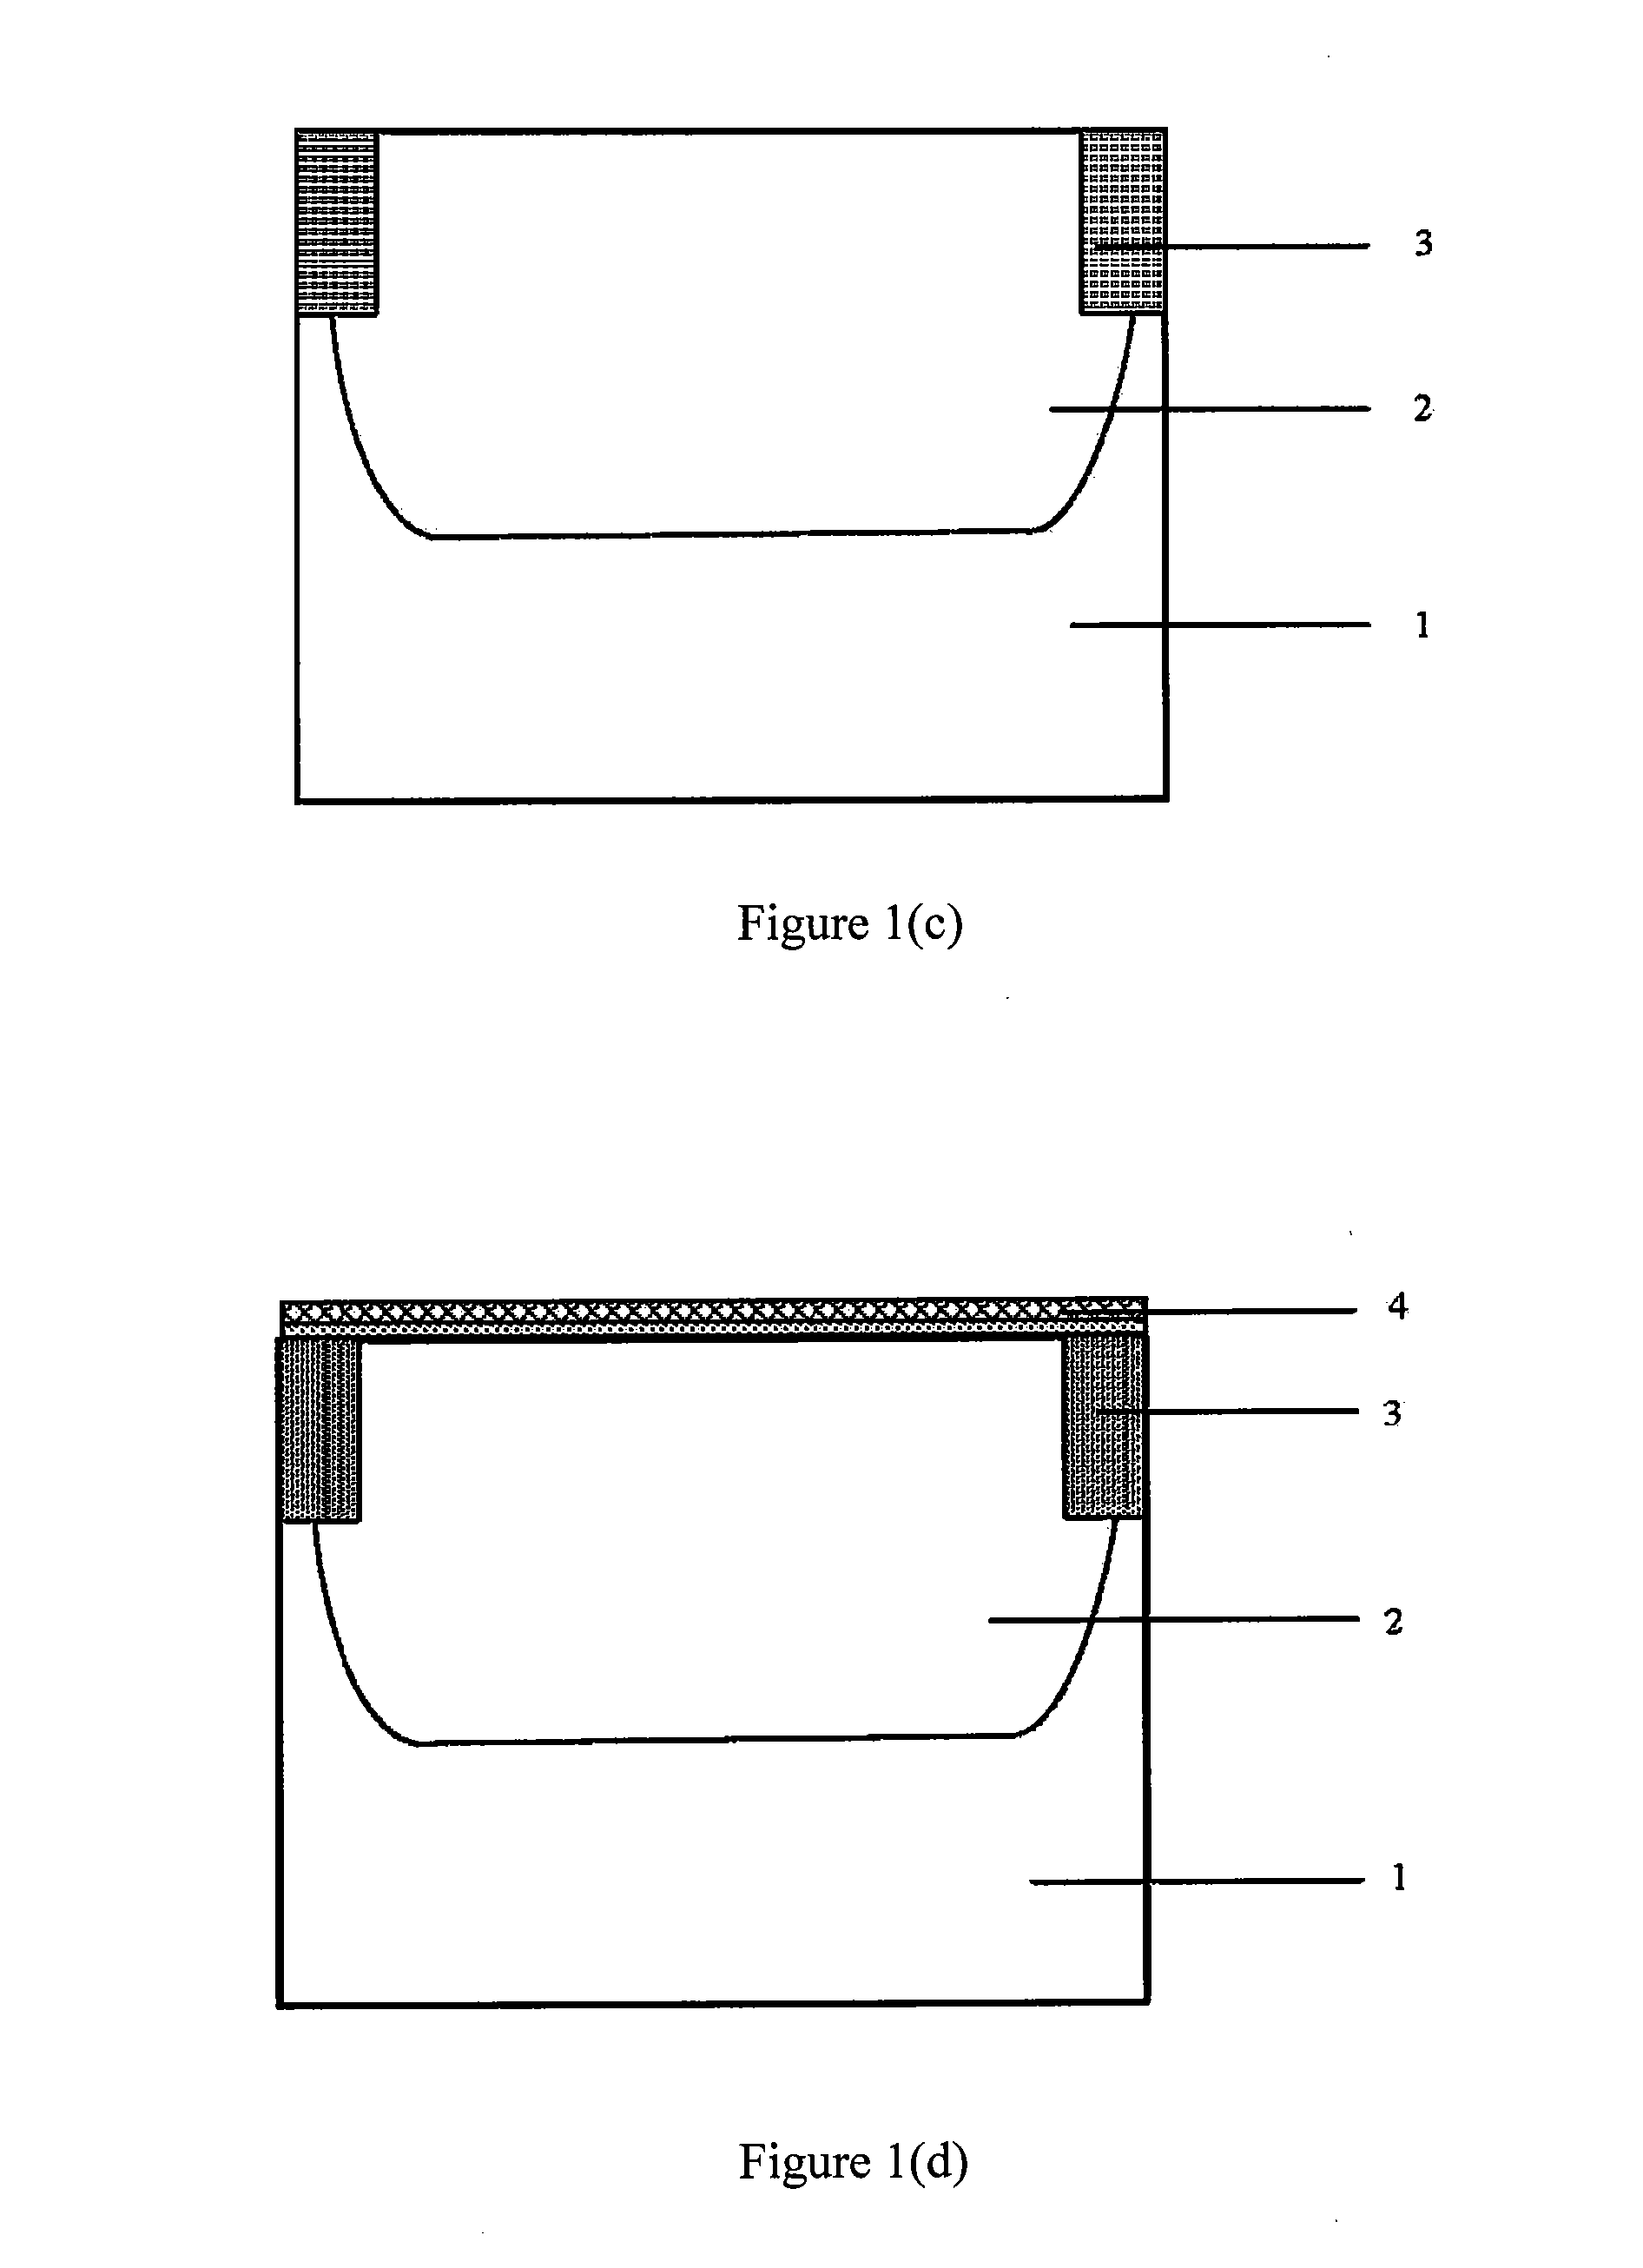 Germanium-based nmos device and method for fabricating the same